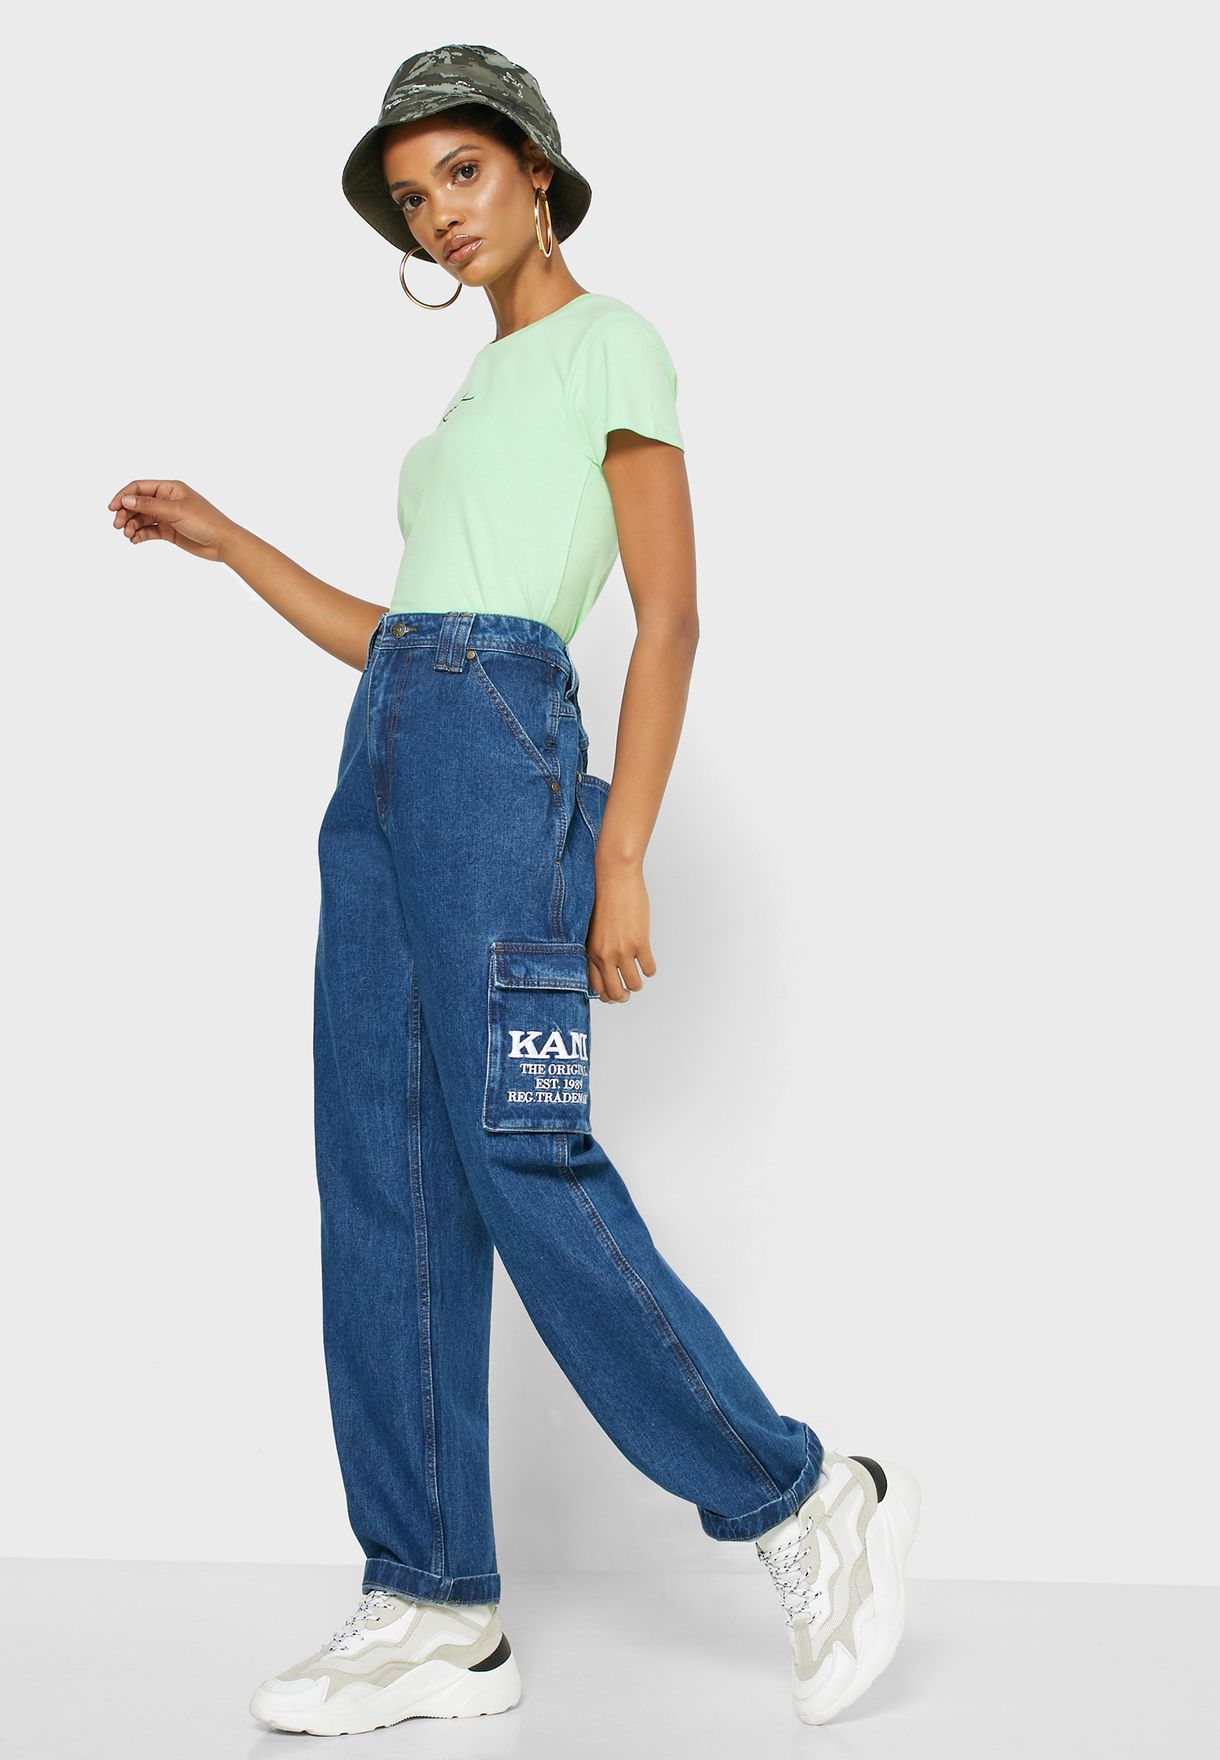 baggy blue jeans womens